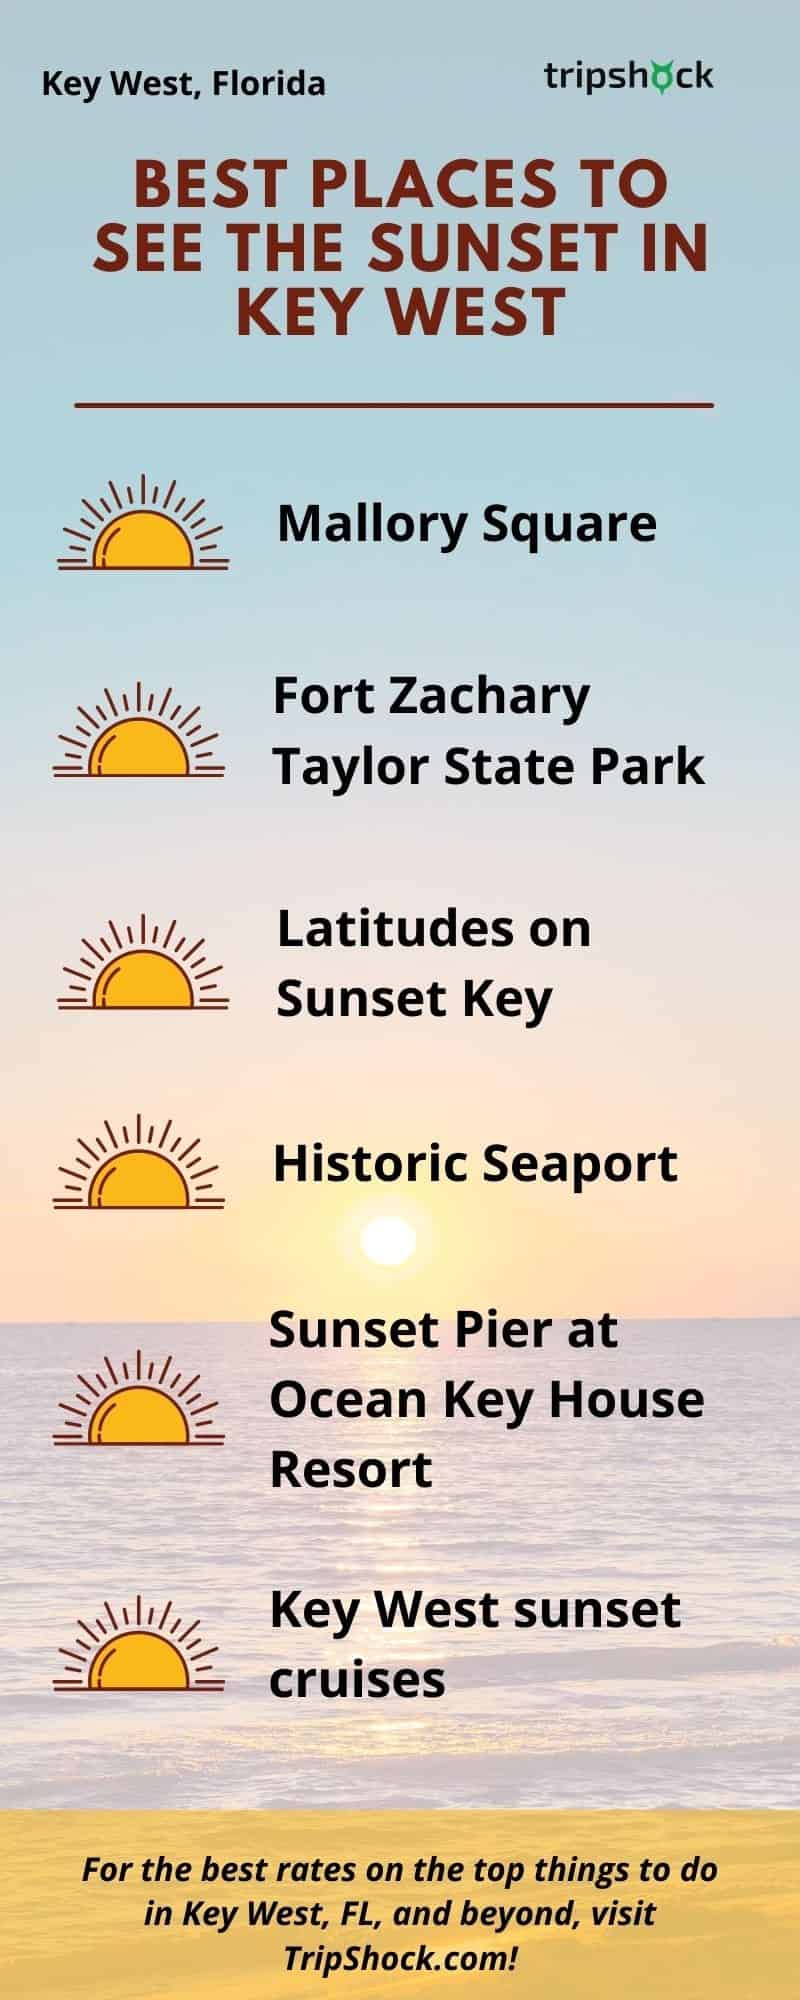 Best Places to See the Sunset in Key West